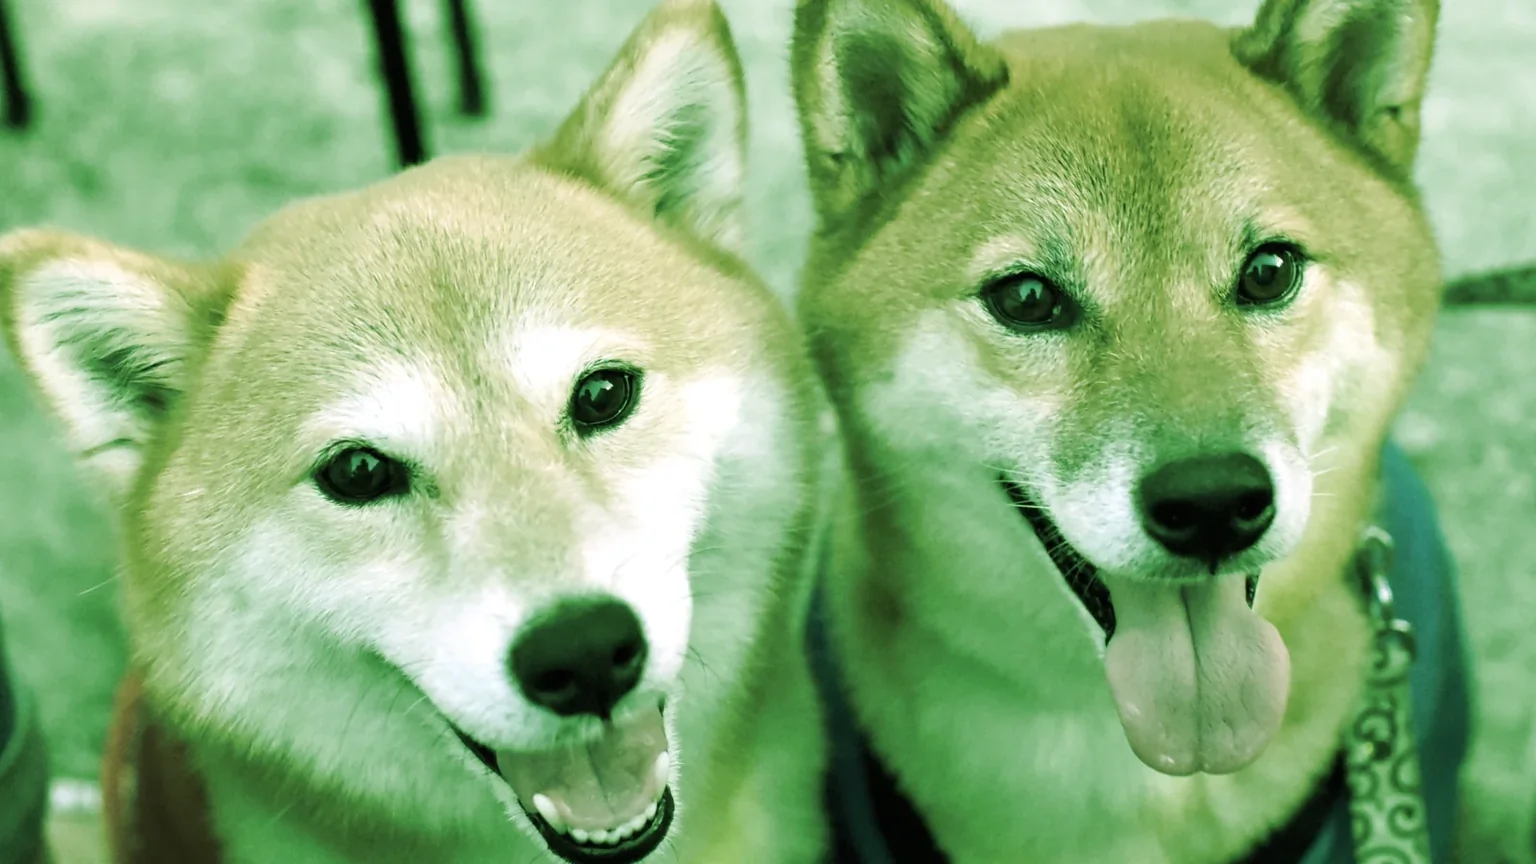 Shiba Inu and Dogecoin are popular cryptocurrencies named after dogs. Image: Shutterstock.